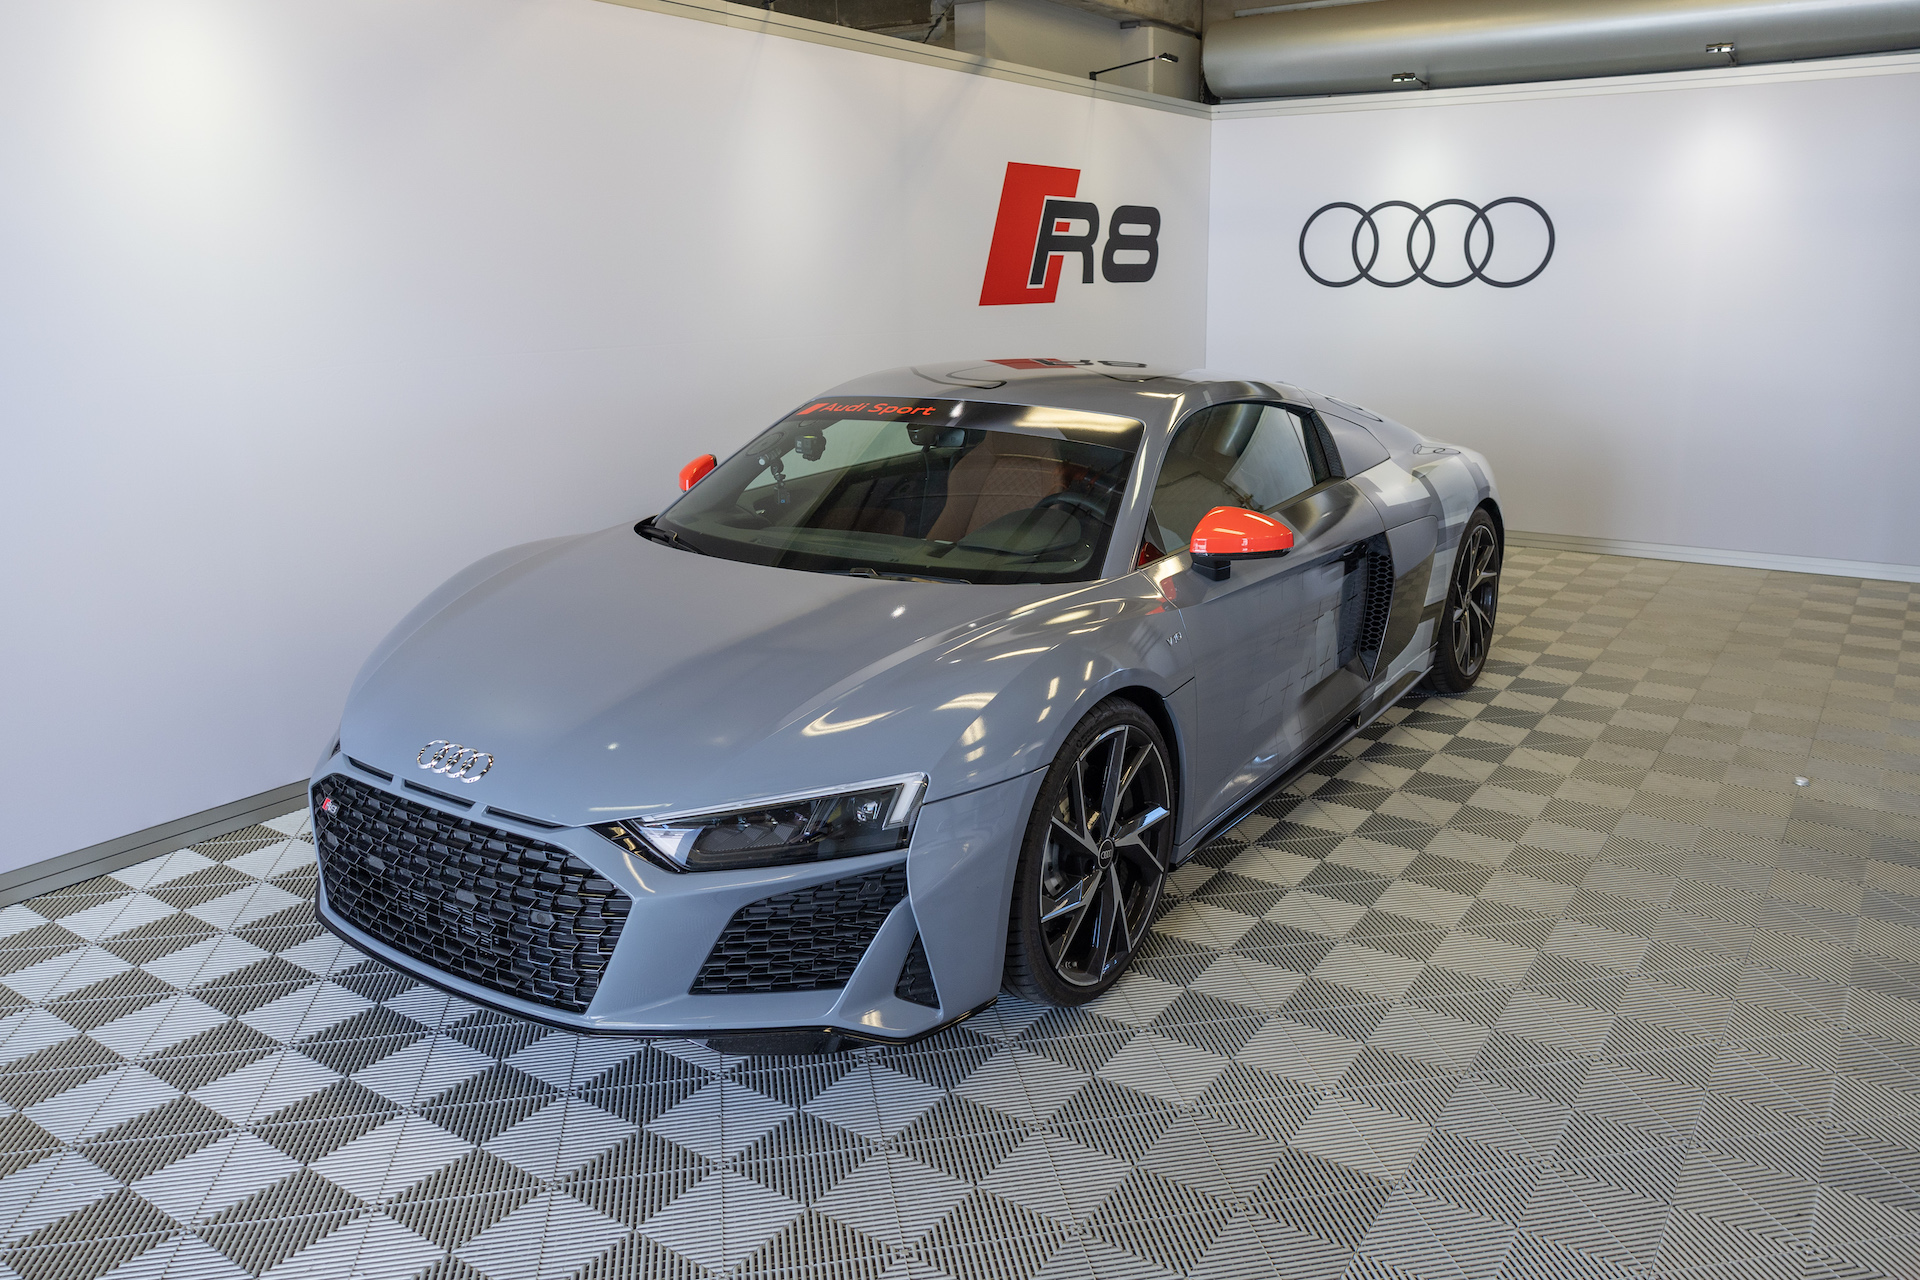 Audi R8 Final Lap: Driving the Mid-Engine Legend Into the Sunset at Laguna  Seca